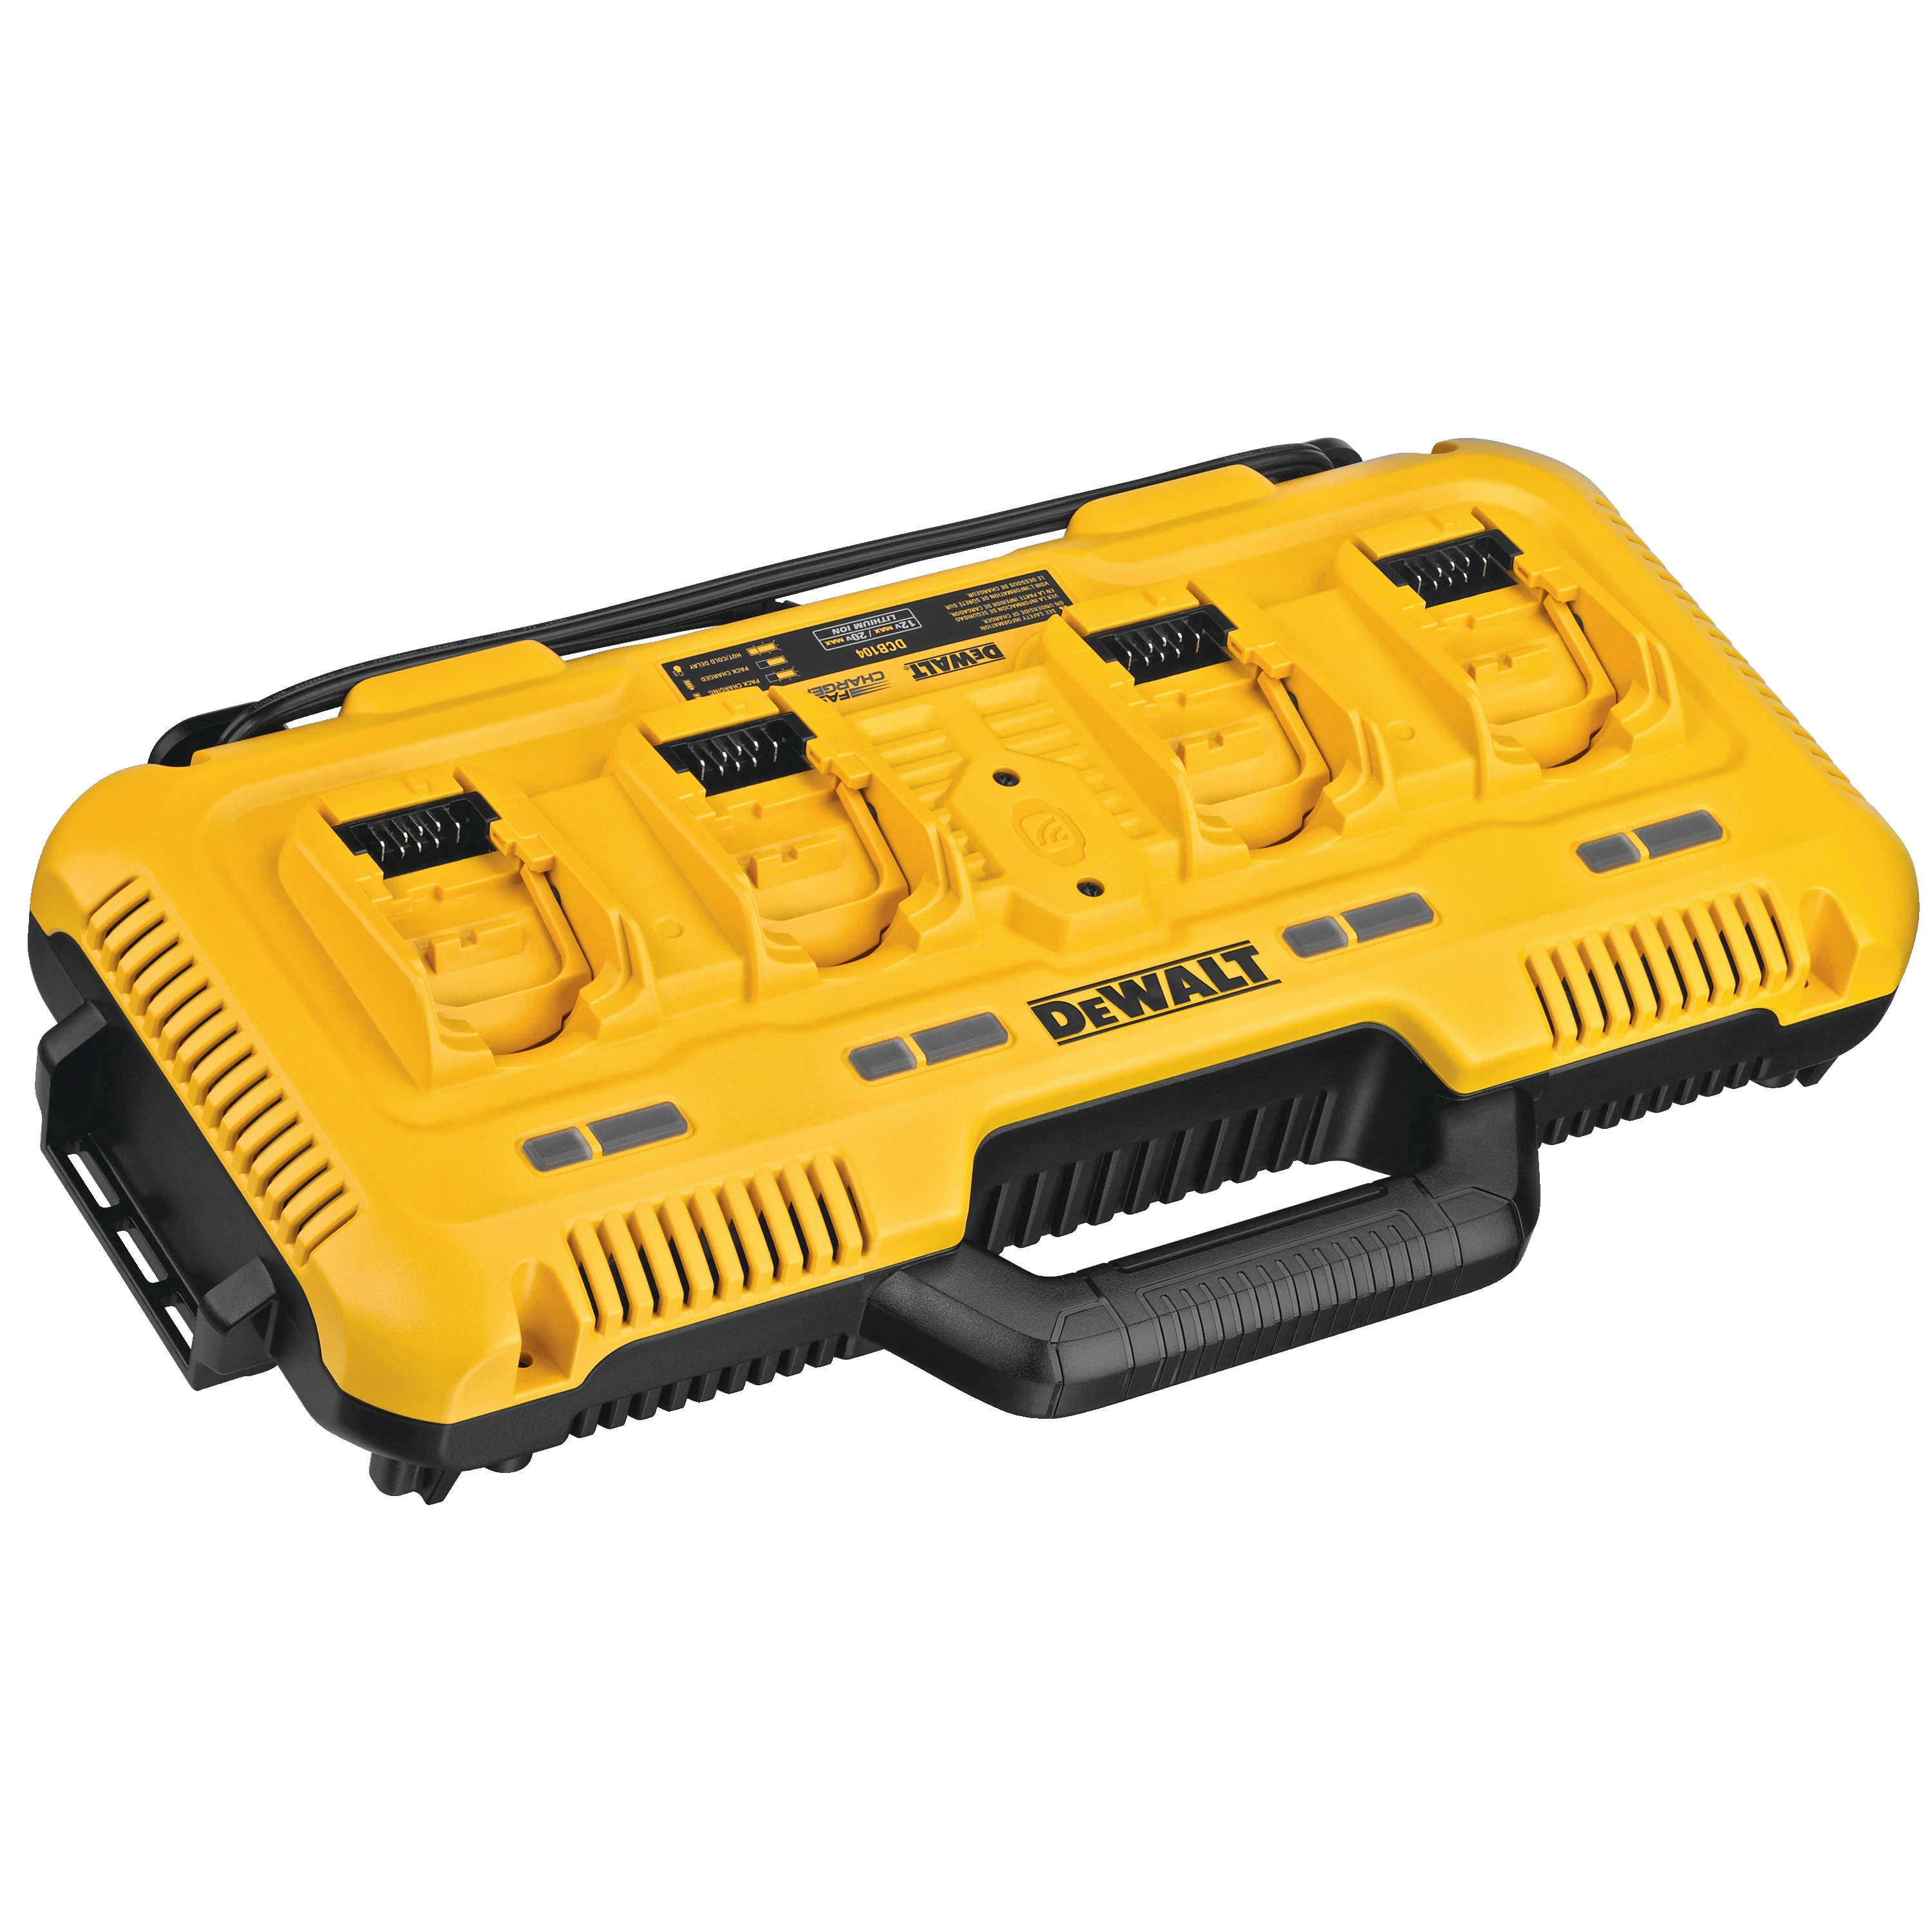 DeWalt Multiport Simultaneous Fast Charger - Power Tools